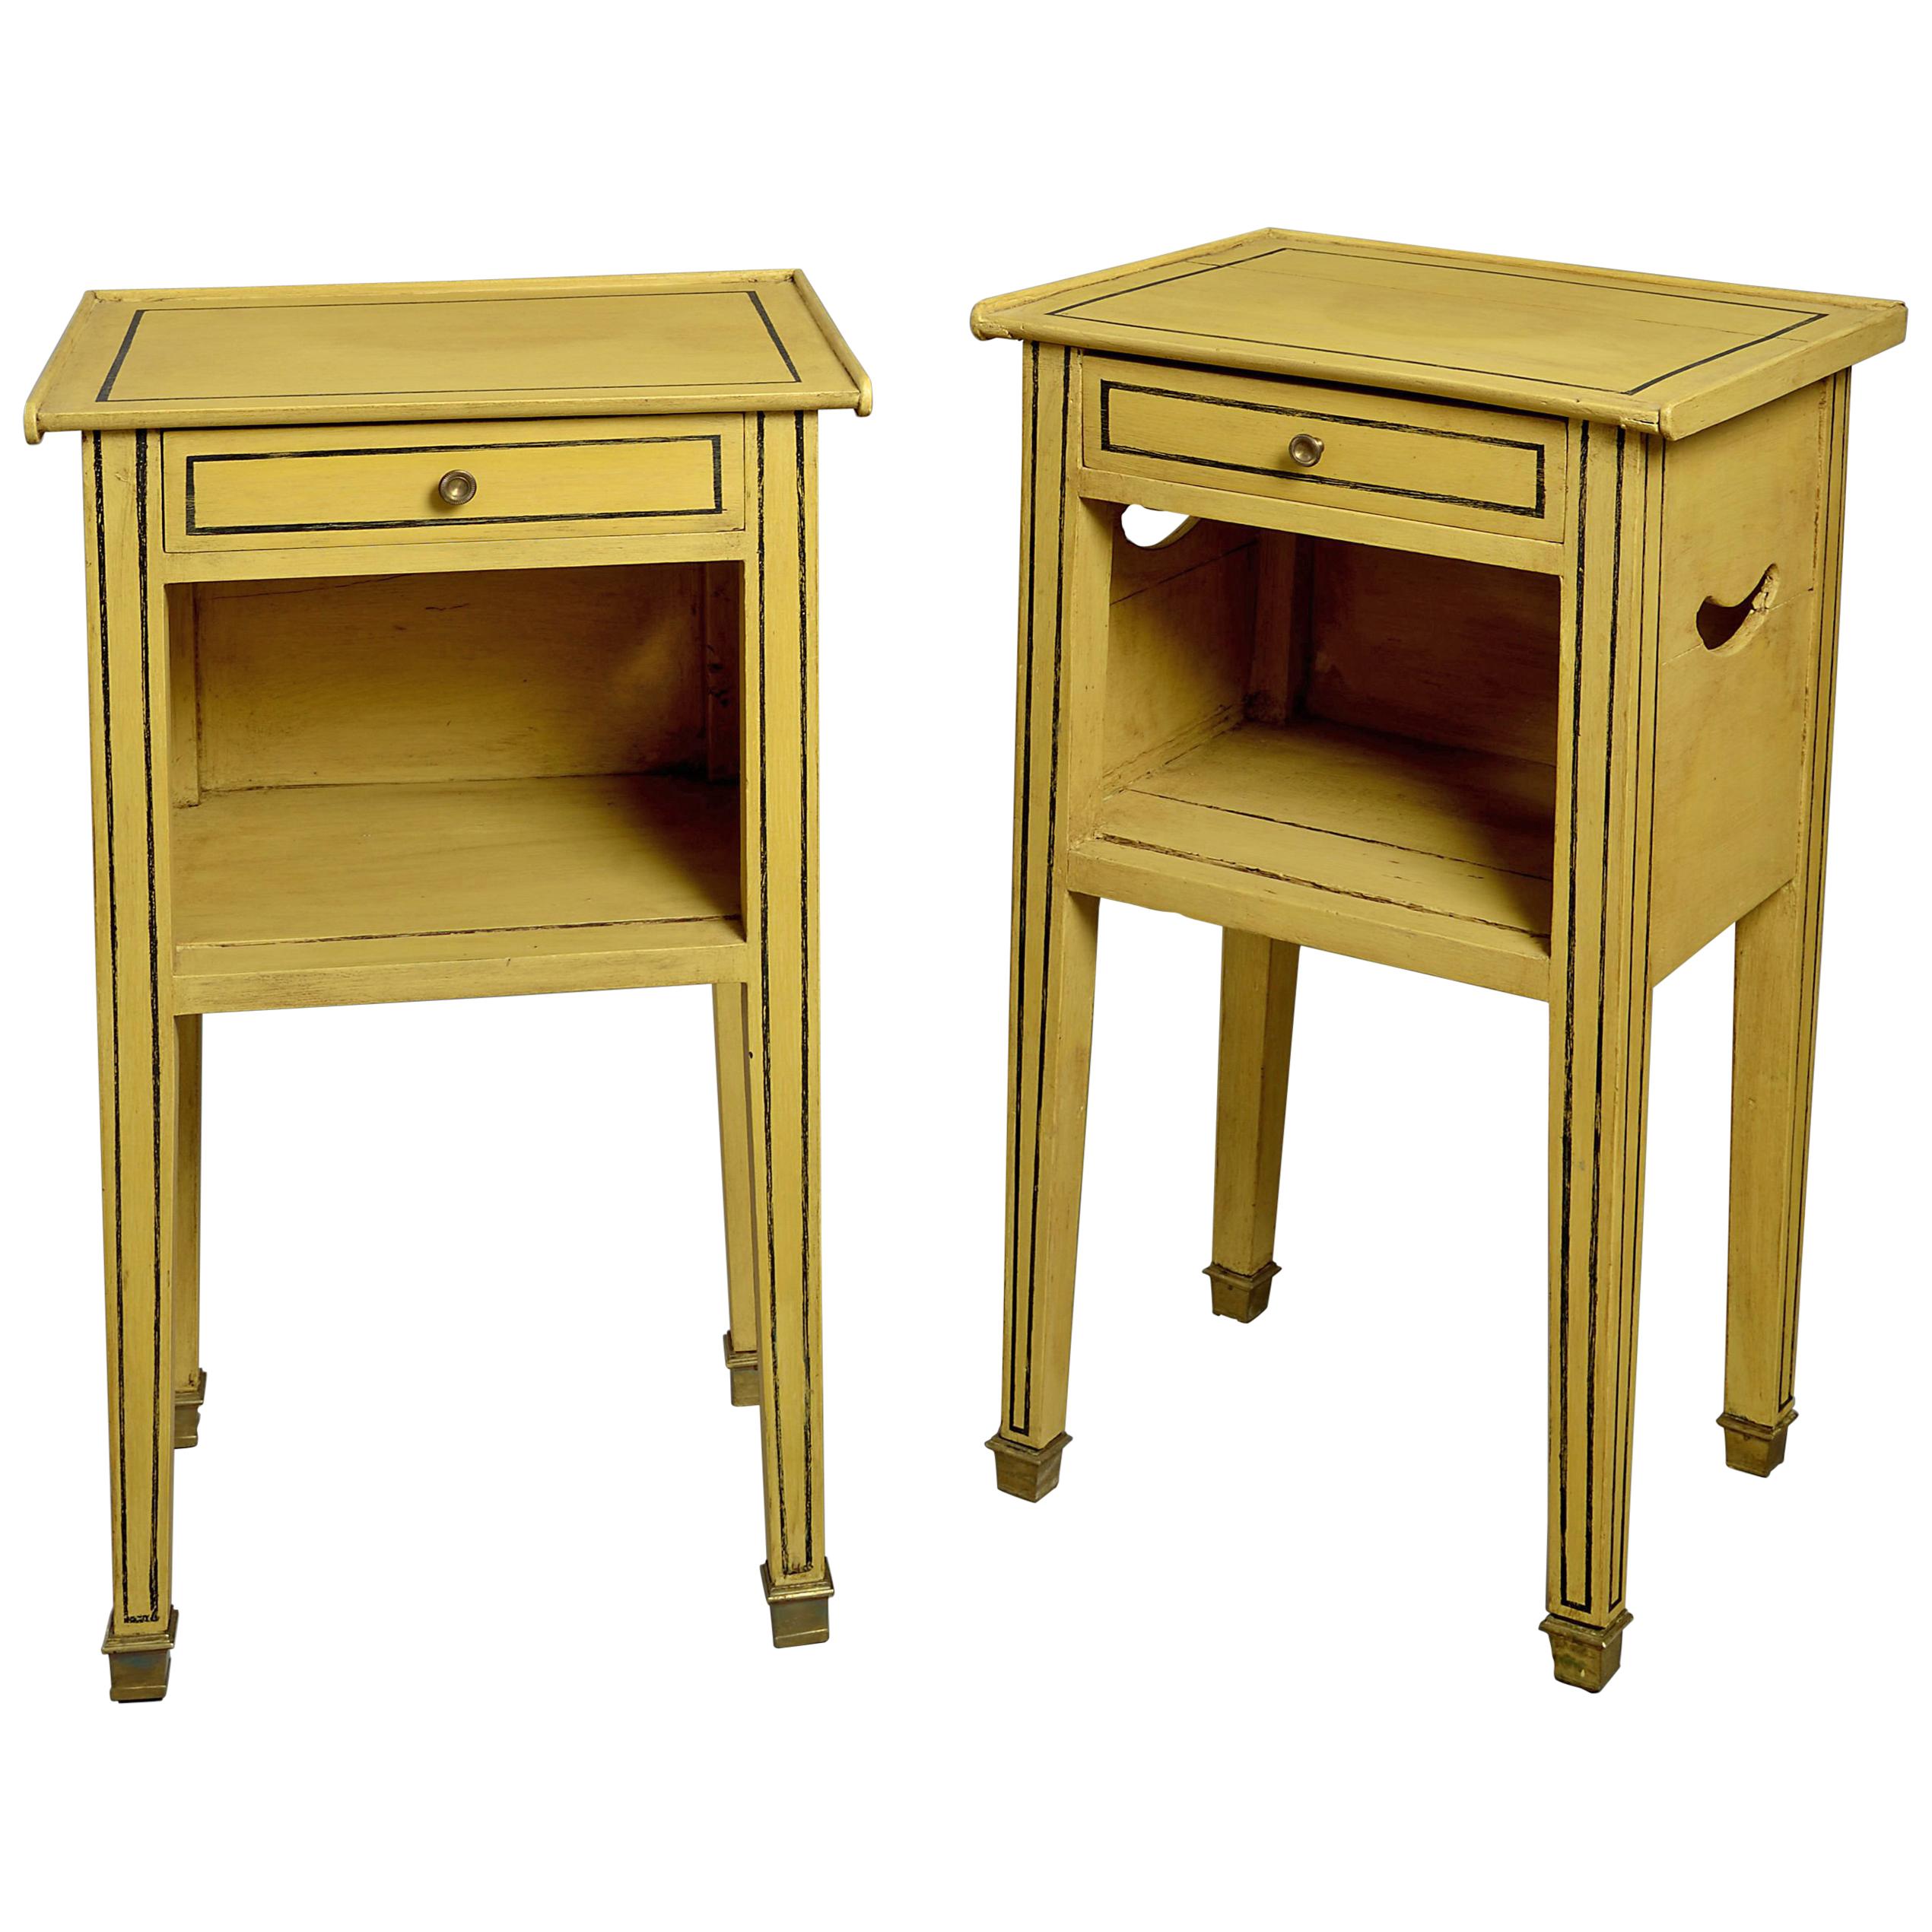 Pair of 19th Century Painted Bedside Tables